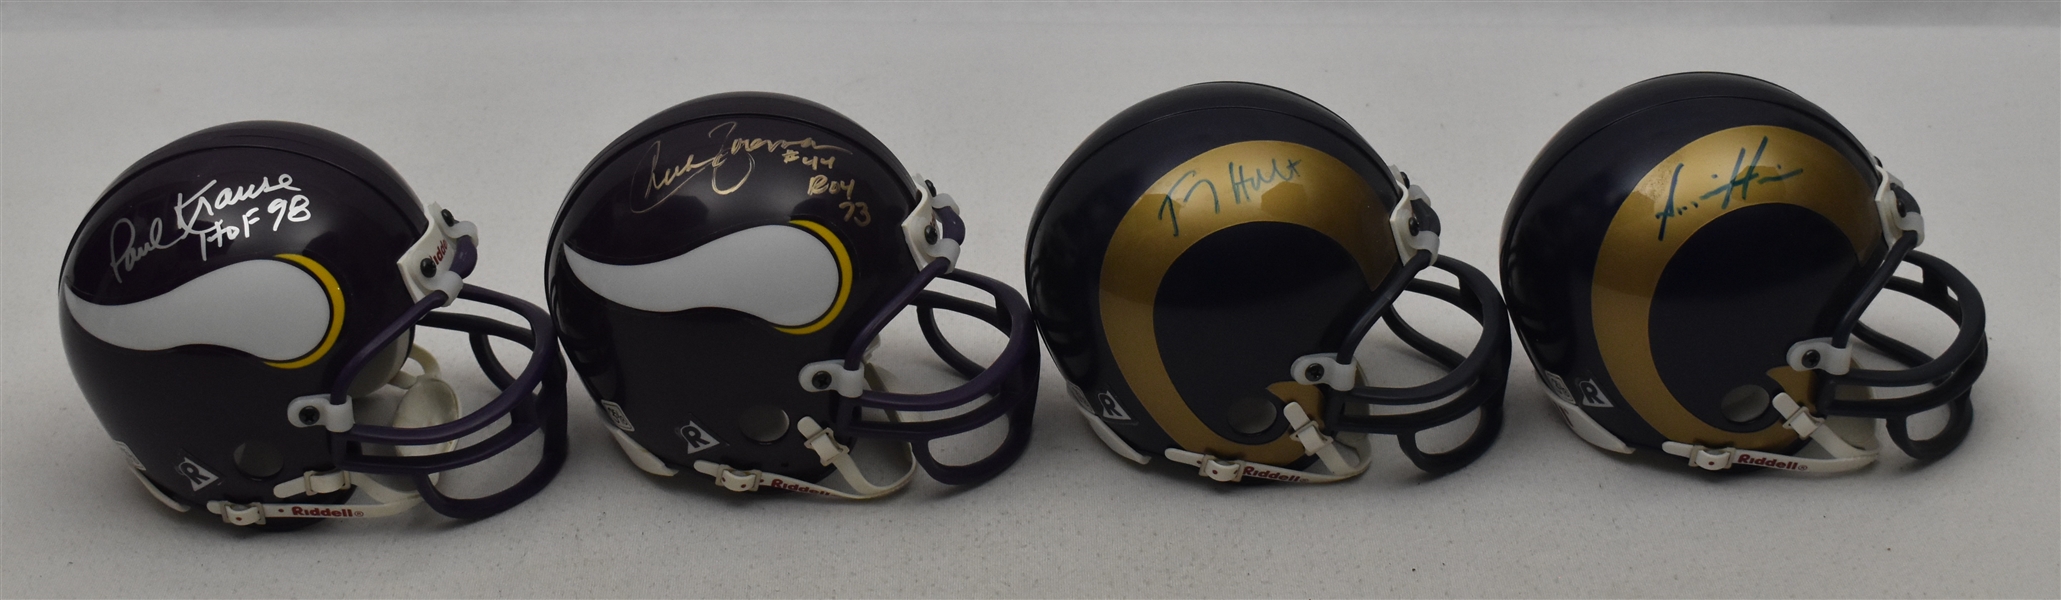 Collection of 4 Autographed Mini Helmets w/Paul Krause Chuck Foreman & Torry Holt